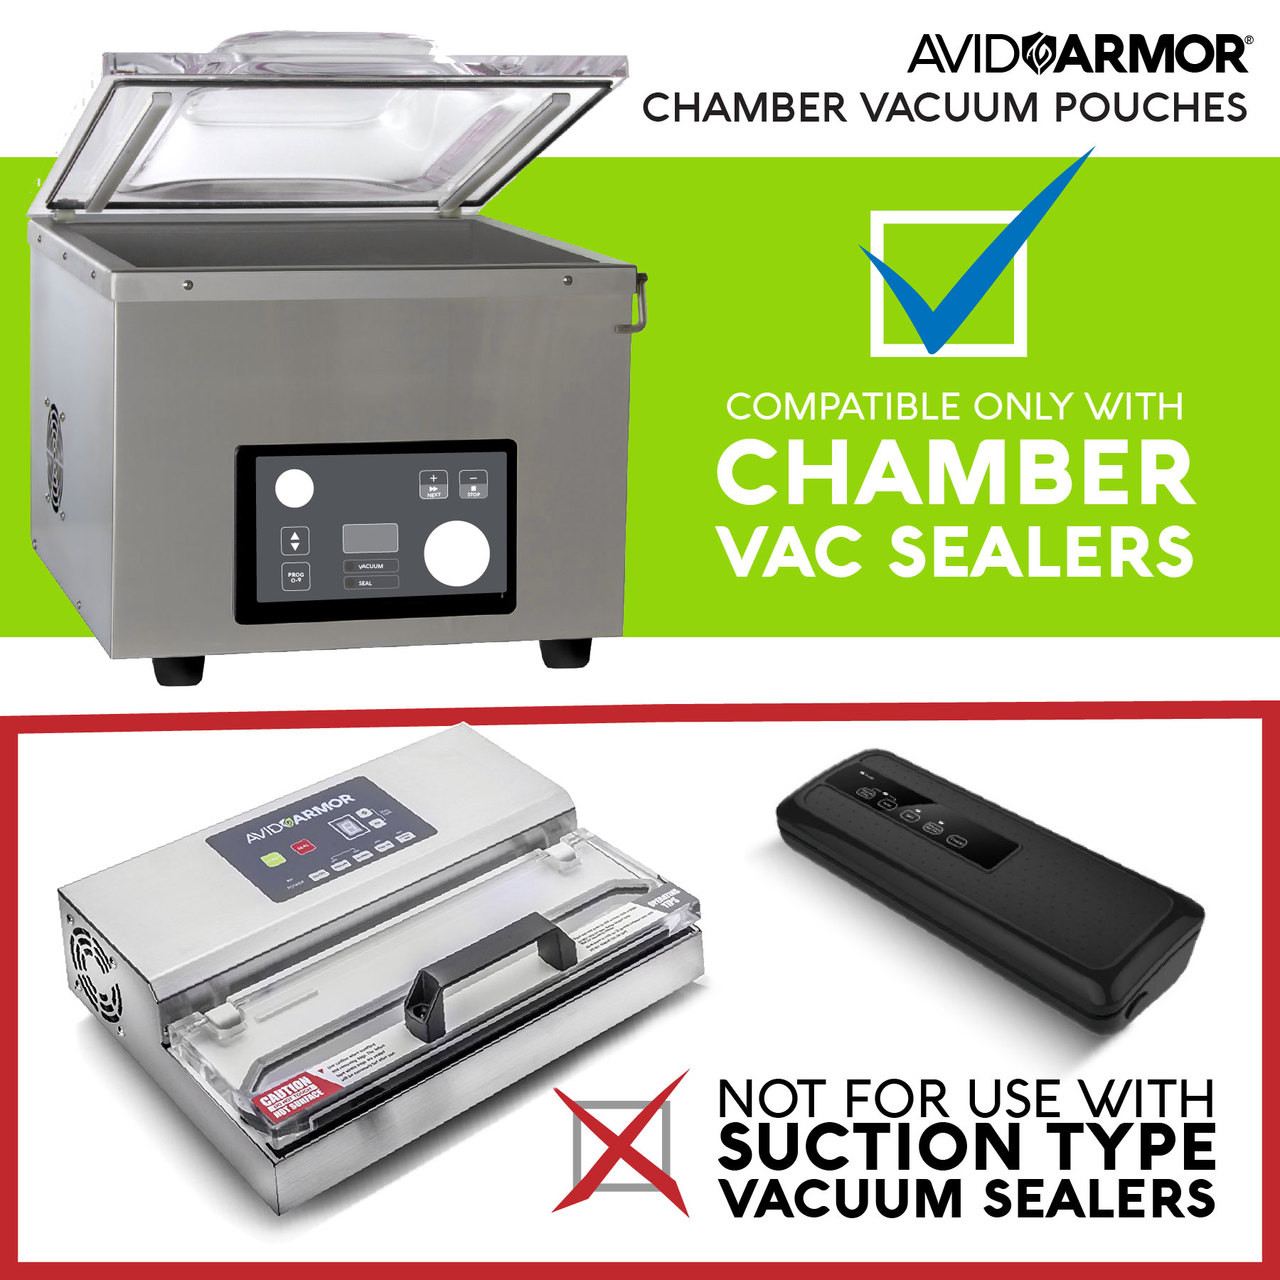 Commercial Chamber Vacuum Sealers from Avid Armor - Top Quality